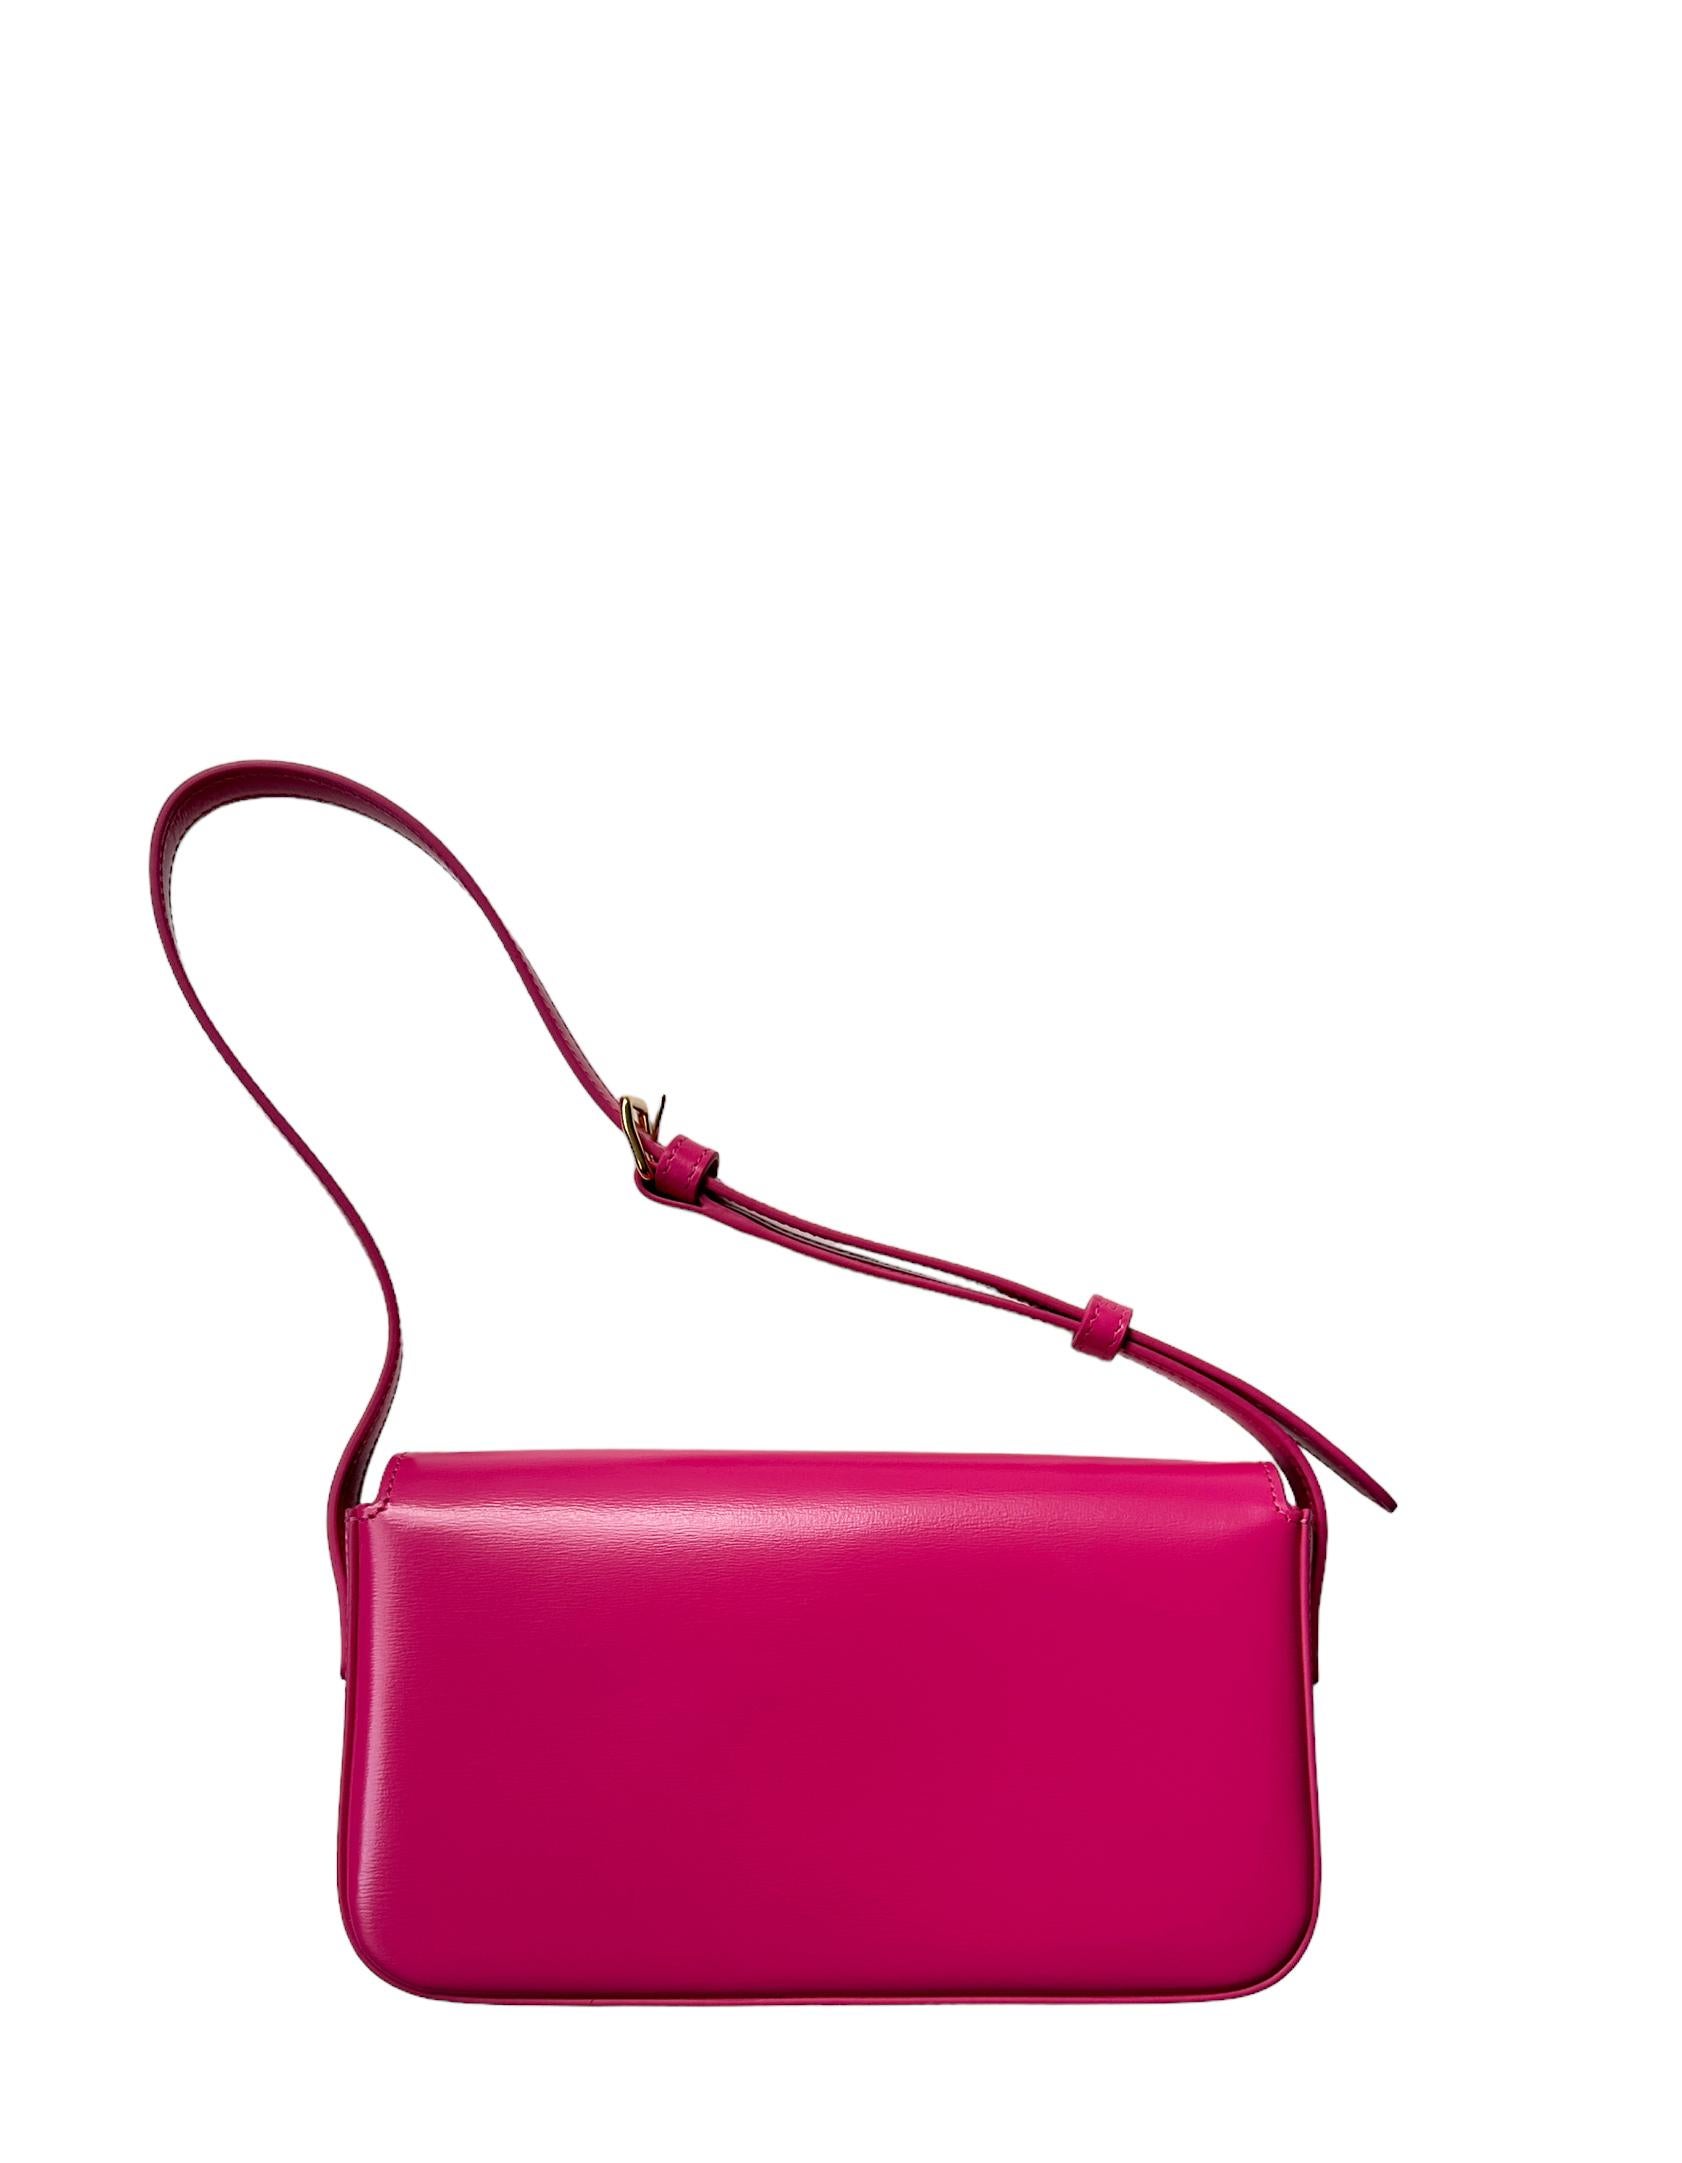 Celine Fuchsia Pink Shiny Calfskin Triomphe Shoulder Bag

Made In: Italy
Year of Production: 2023
Color: Fuchsia
Hardware: Goldtone
Materials: Shiny calfskin leather
Lining: Pink leather
Closure/Opening: Flap top
Exterior Pockets: None
Interior